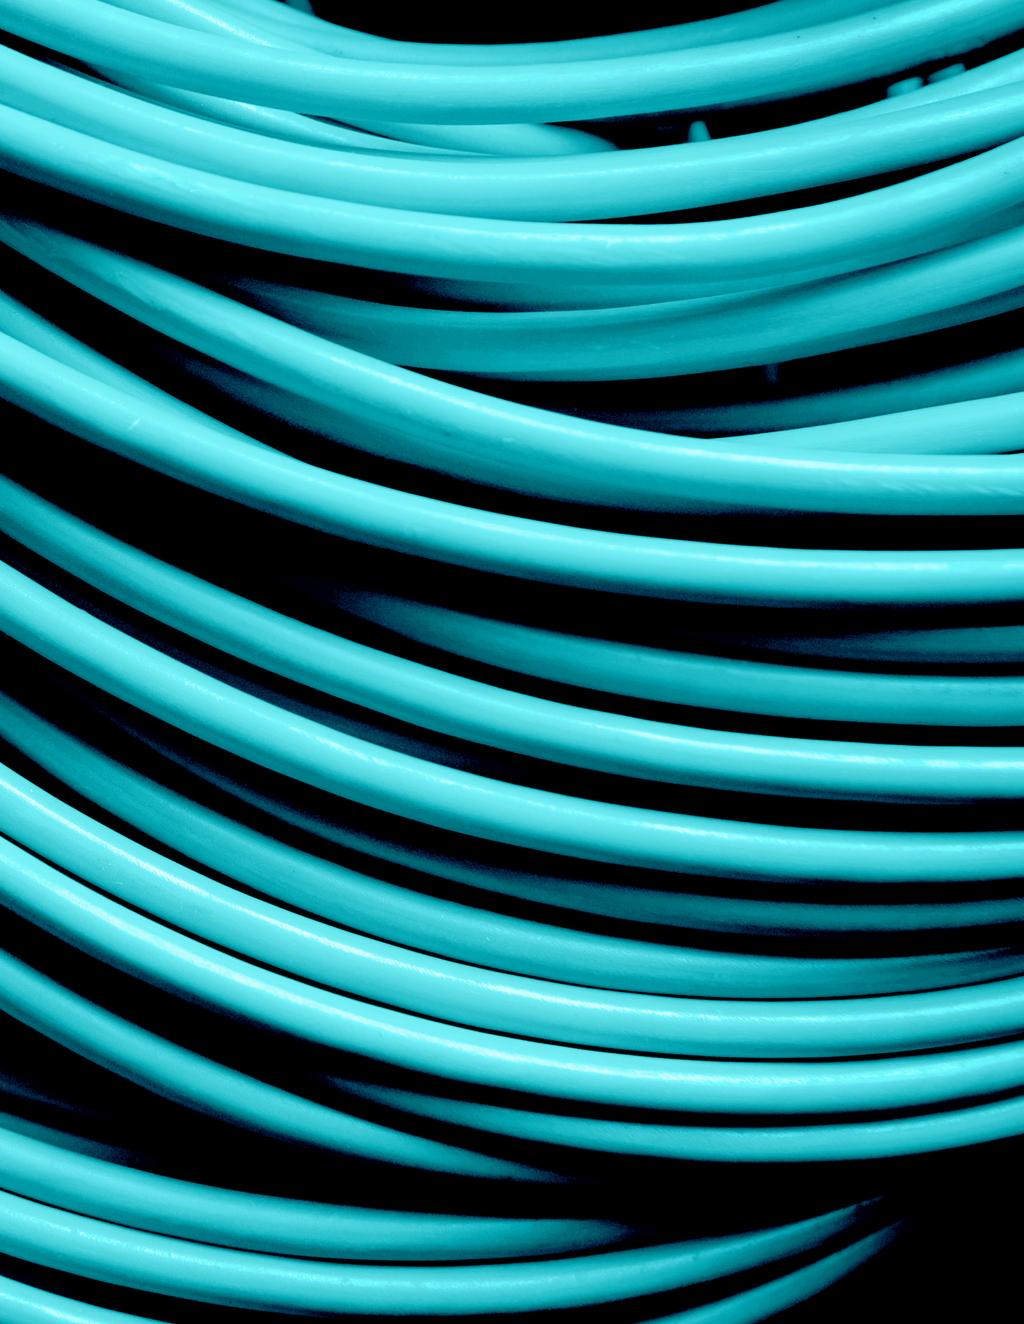 FIBER OPTIC CABLE CUT TO YOUR